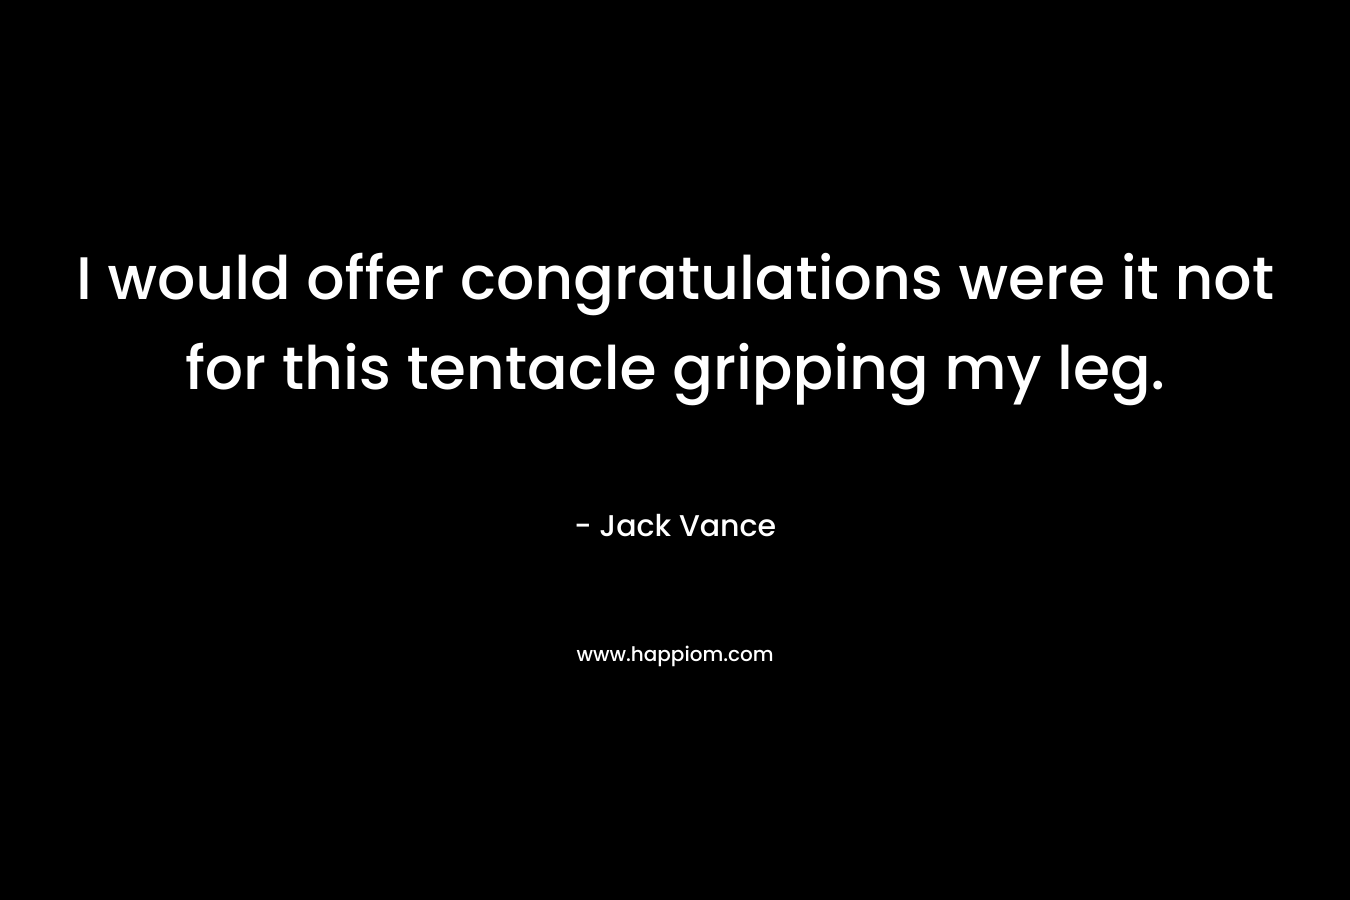 I would offer congratulations were it not for this tentacle gripping my leg. – Jack Vance